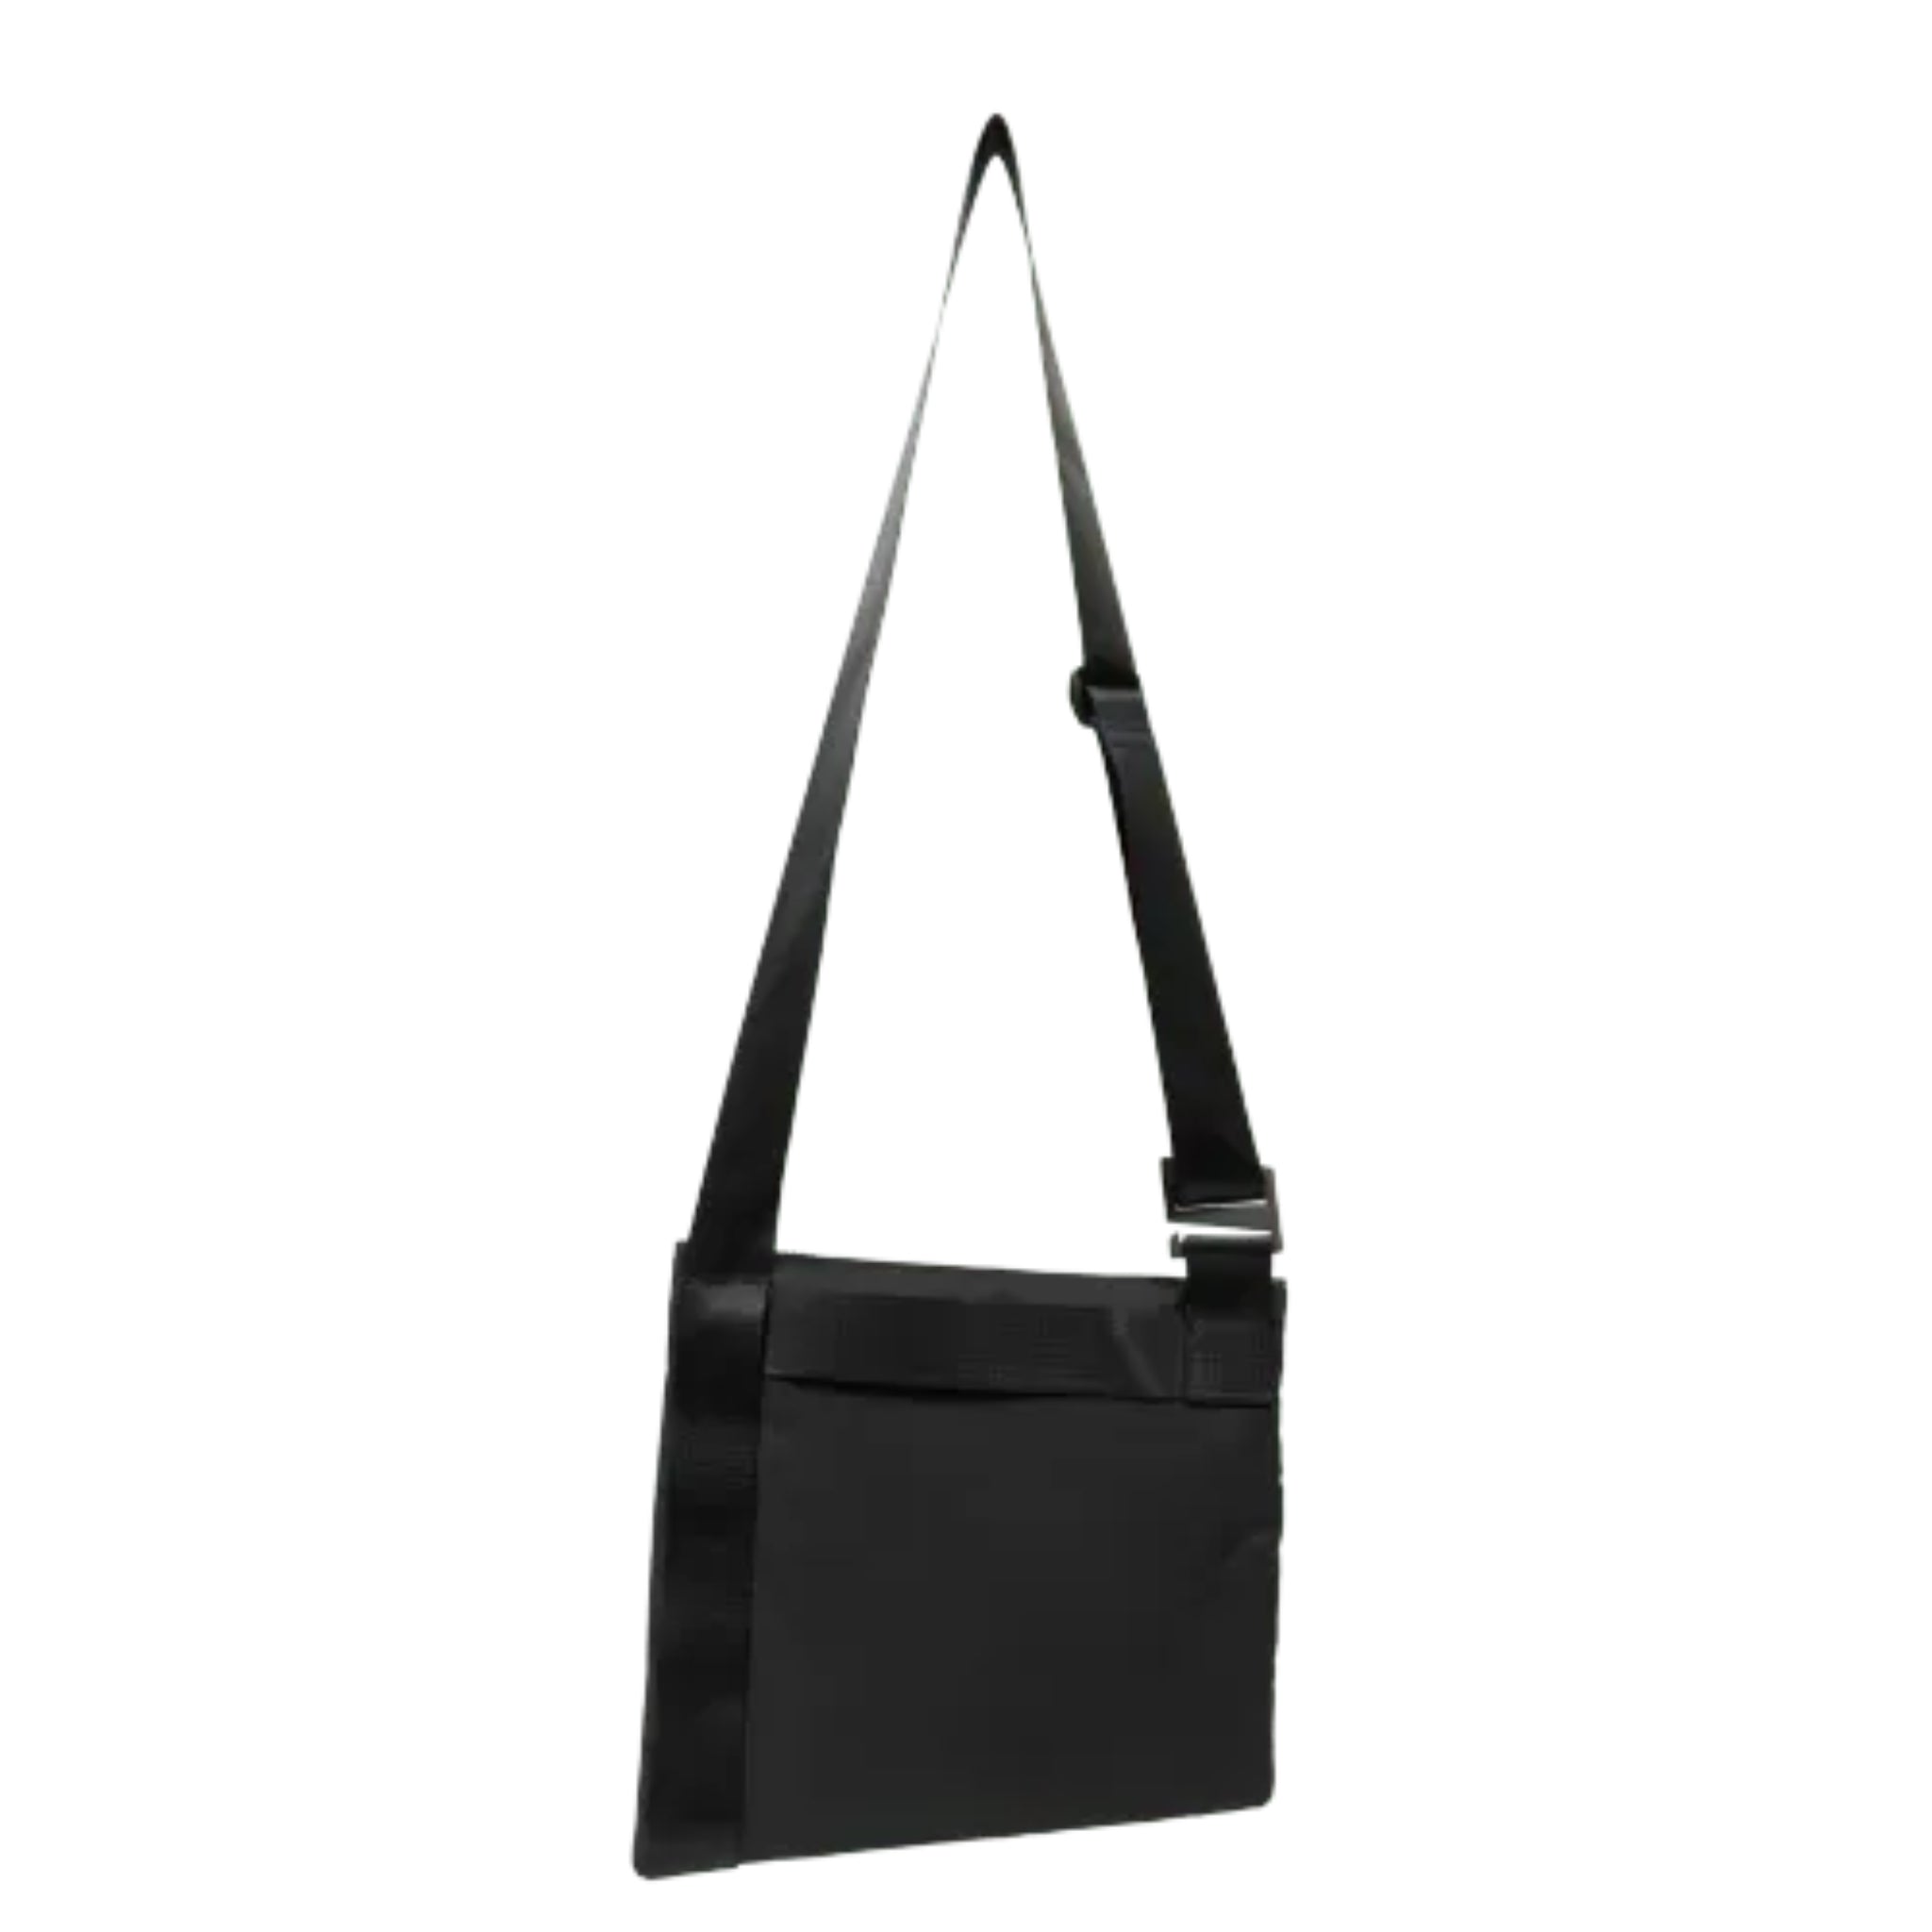 The back of theANDO satchel in black upcycled fishnets (econyl). Product shown at the front/center of a white background